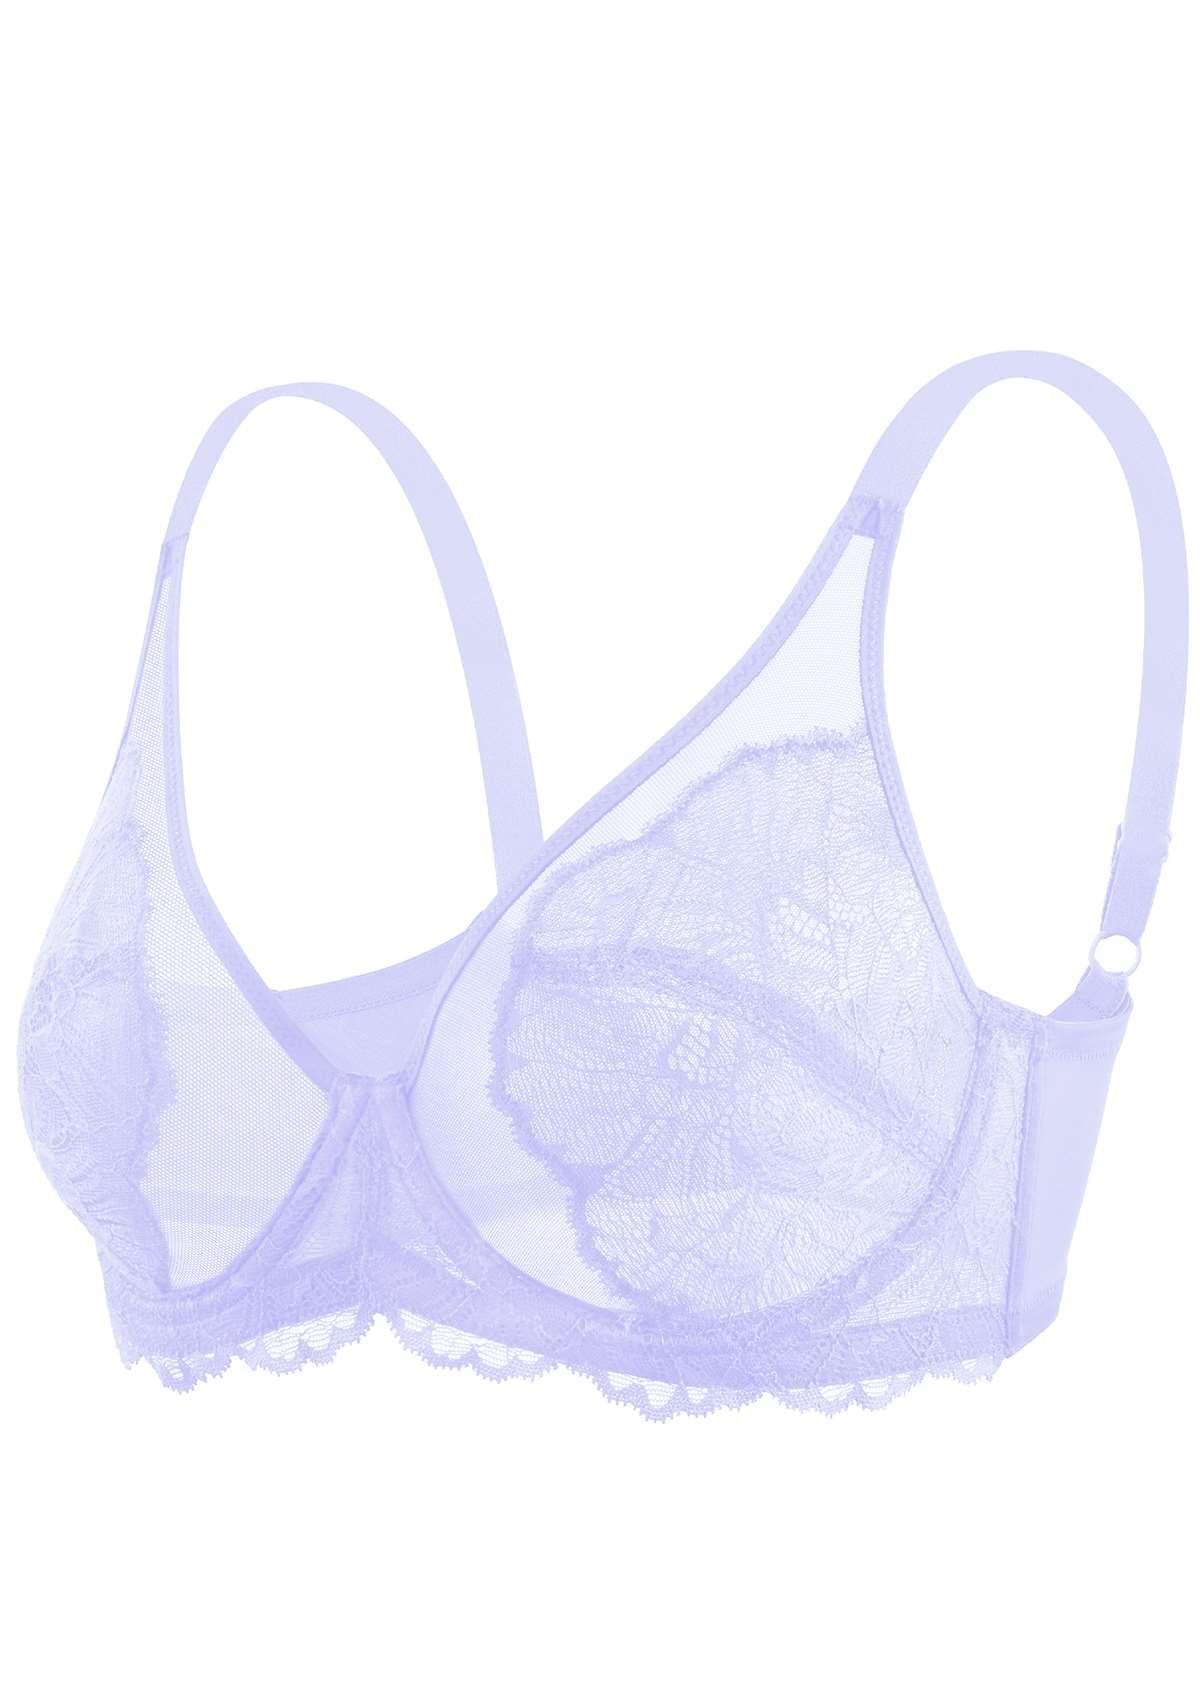 HSIA Blossom Transparent Lace Bra: Plus Size Wired Back Smoothing Bra - Light Purple / 42 / DDD/F